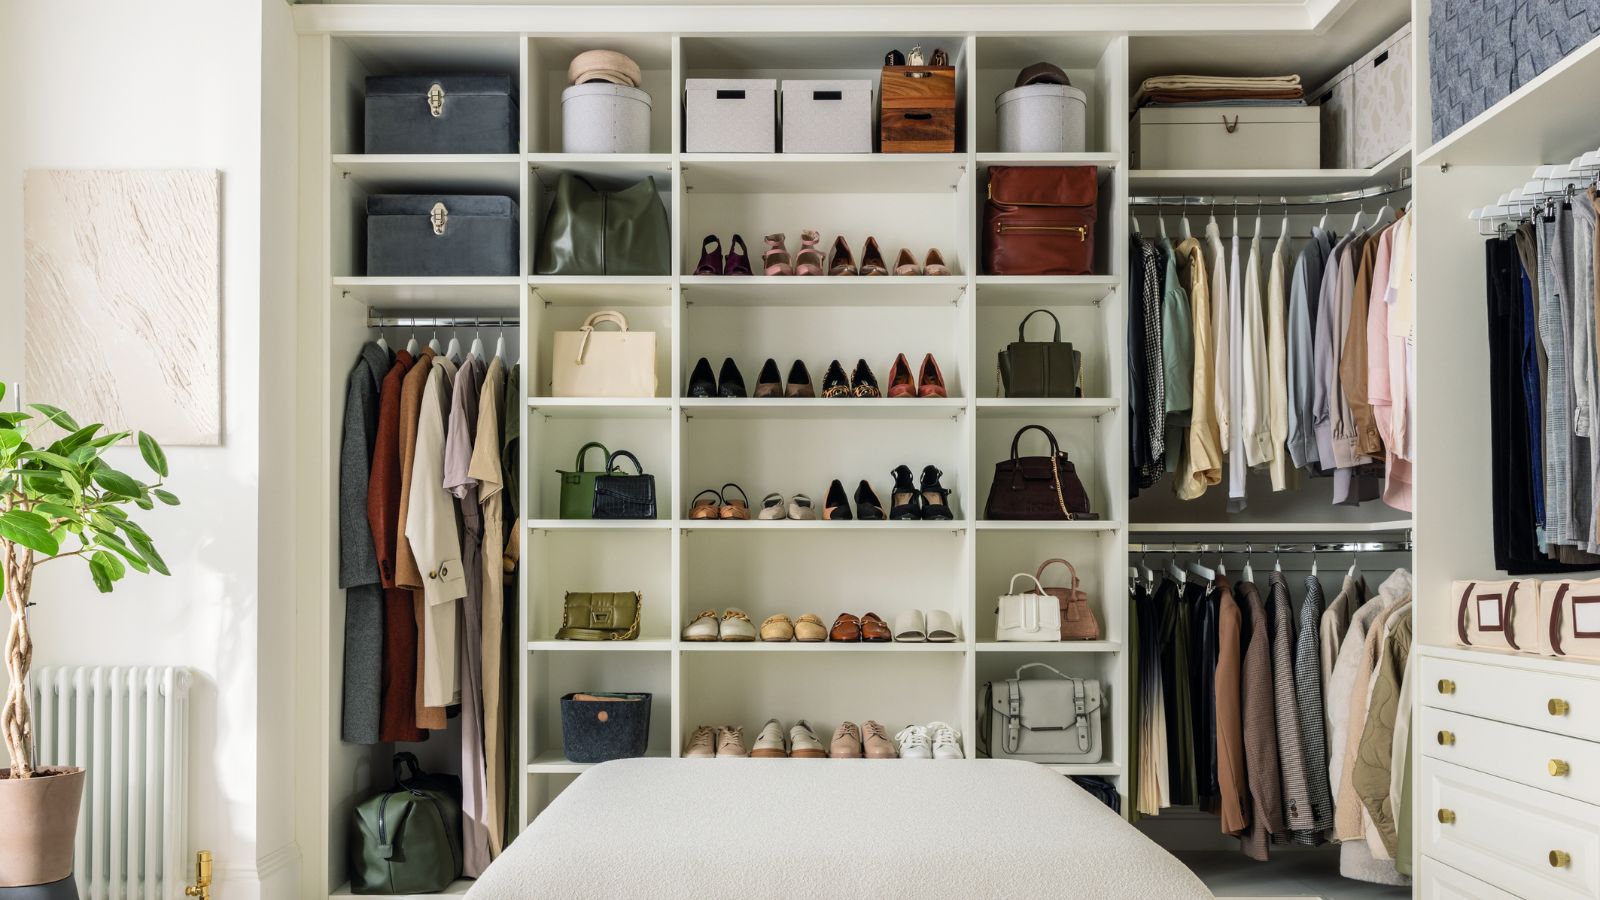 How to Clean Your Closet According to a Professional Organizer